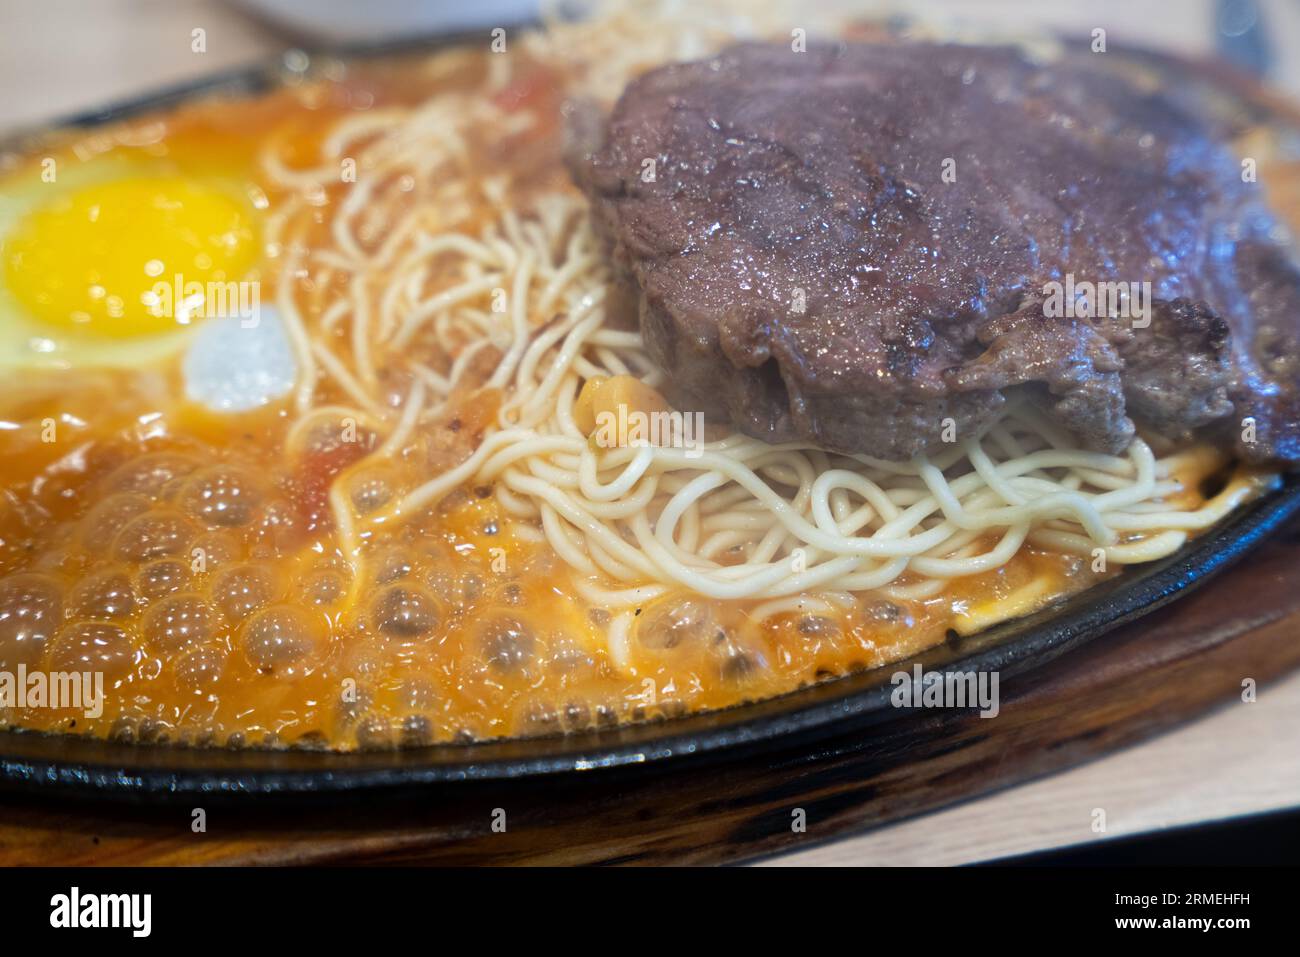 Taiwanese style special sizzling beef steak with noodles, egg and sauce on an hot iron board in traditional night market. Stock Photo